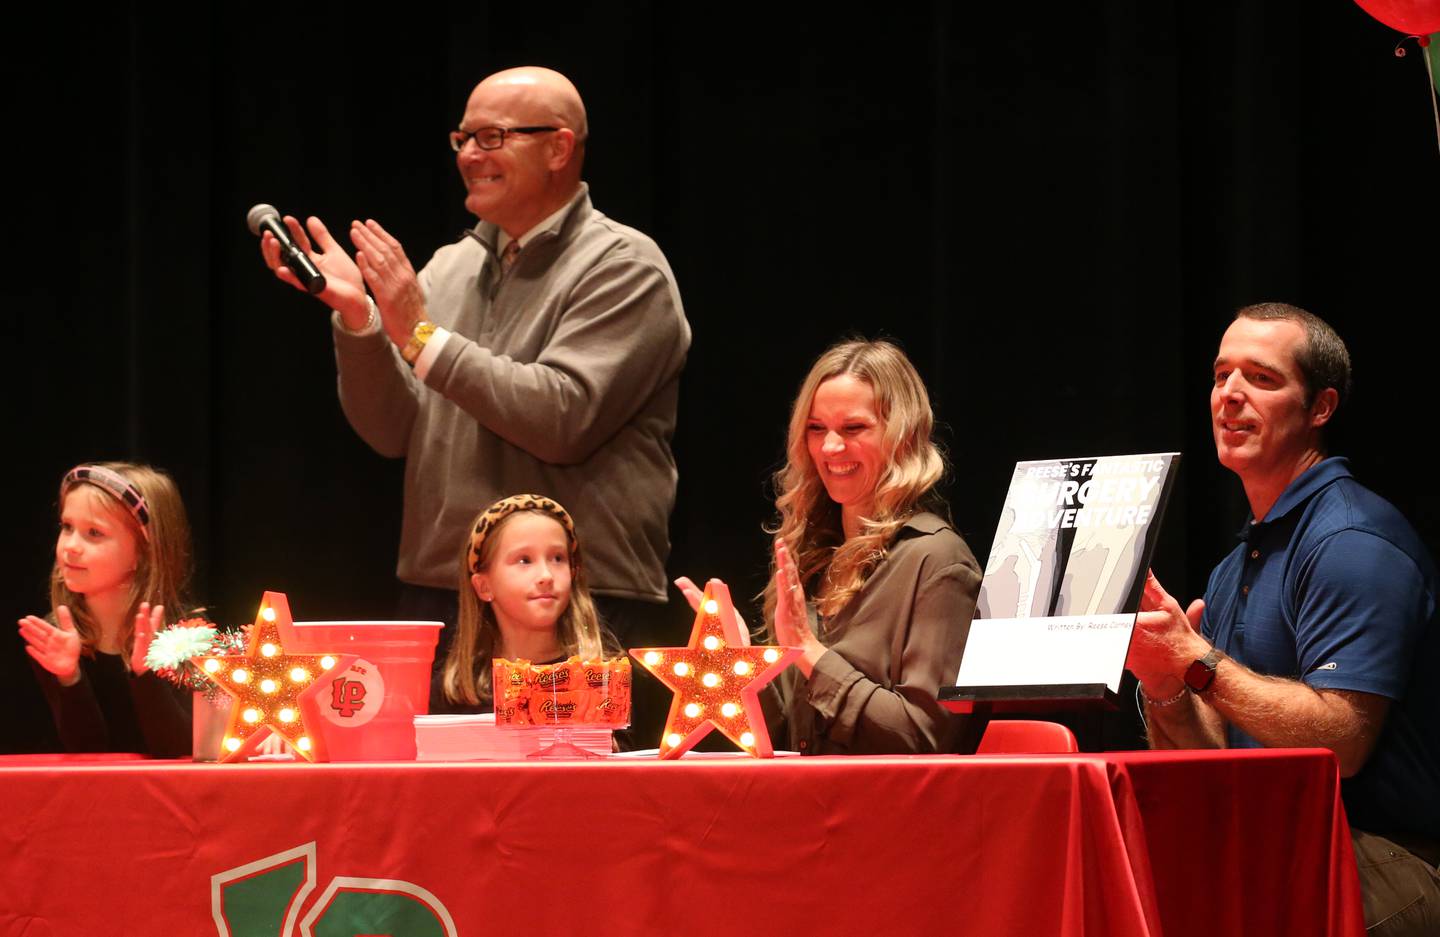 La Salle-Peru Township High School superintendent Steve Wrobleski (back) applauds with the Carney family (front from left) Avery, Reese, Amy and Pat unveil a new book that Reese wrote titled "Reeses Fantastic Surgery Adventure" on Monday, Nov. 6, 2023 at Matthiessen Auditorium.